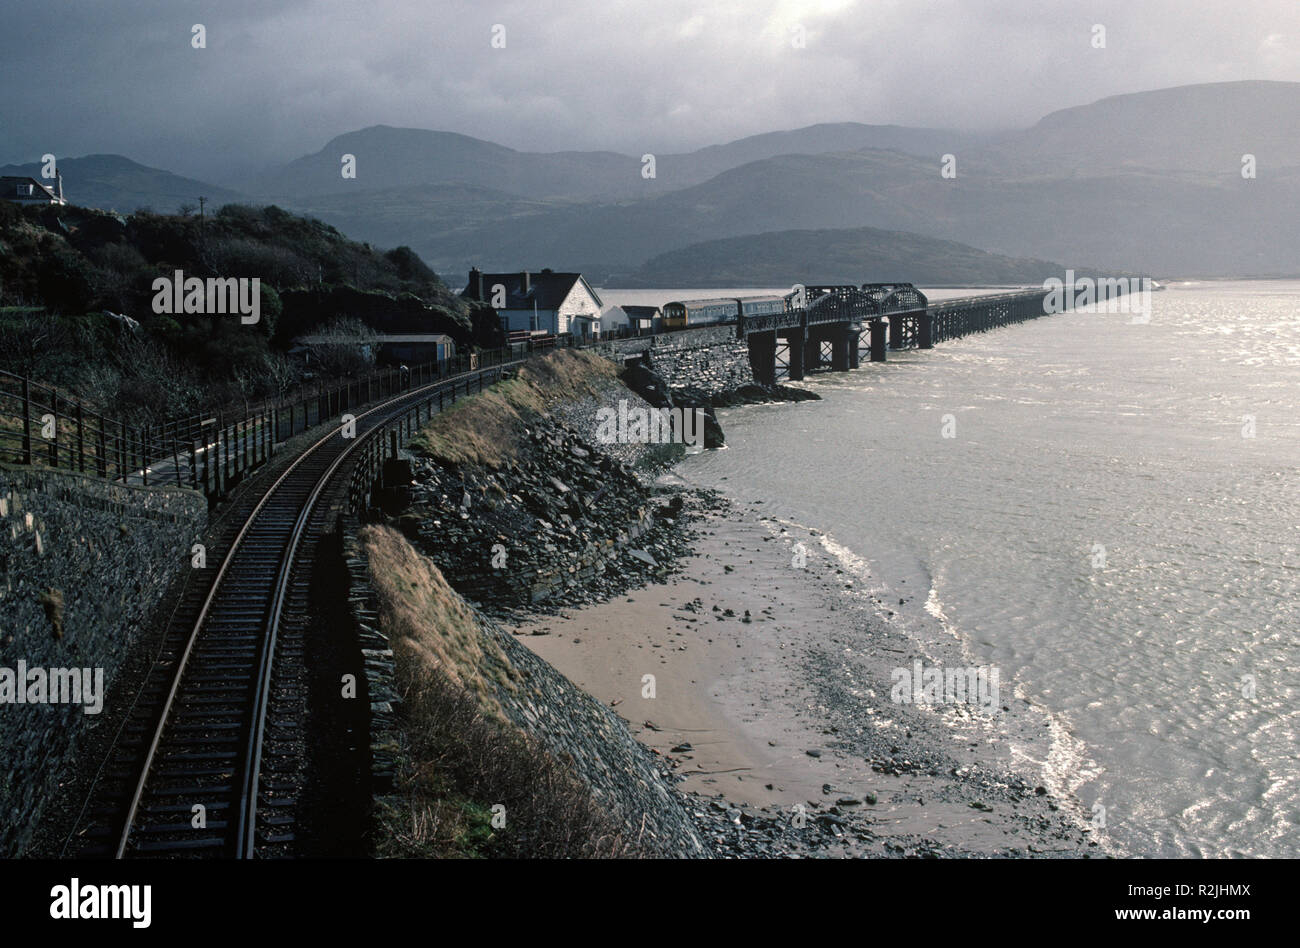 British Rail Diesel Multiple Unit, DMU, train on the Dovey Junction to Pwllheli Cambrian Coast railway line, Barmouth Bridge over River Mawddach, Mid Wales, Great Britain Stock Photo